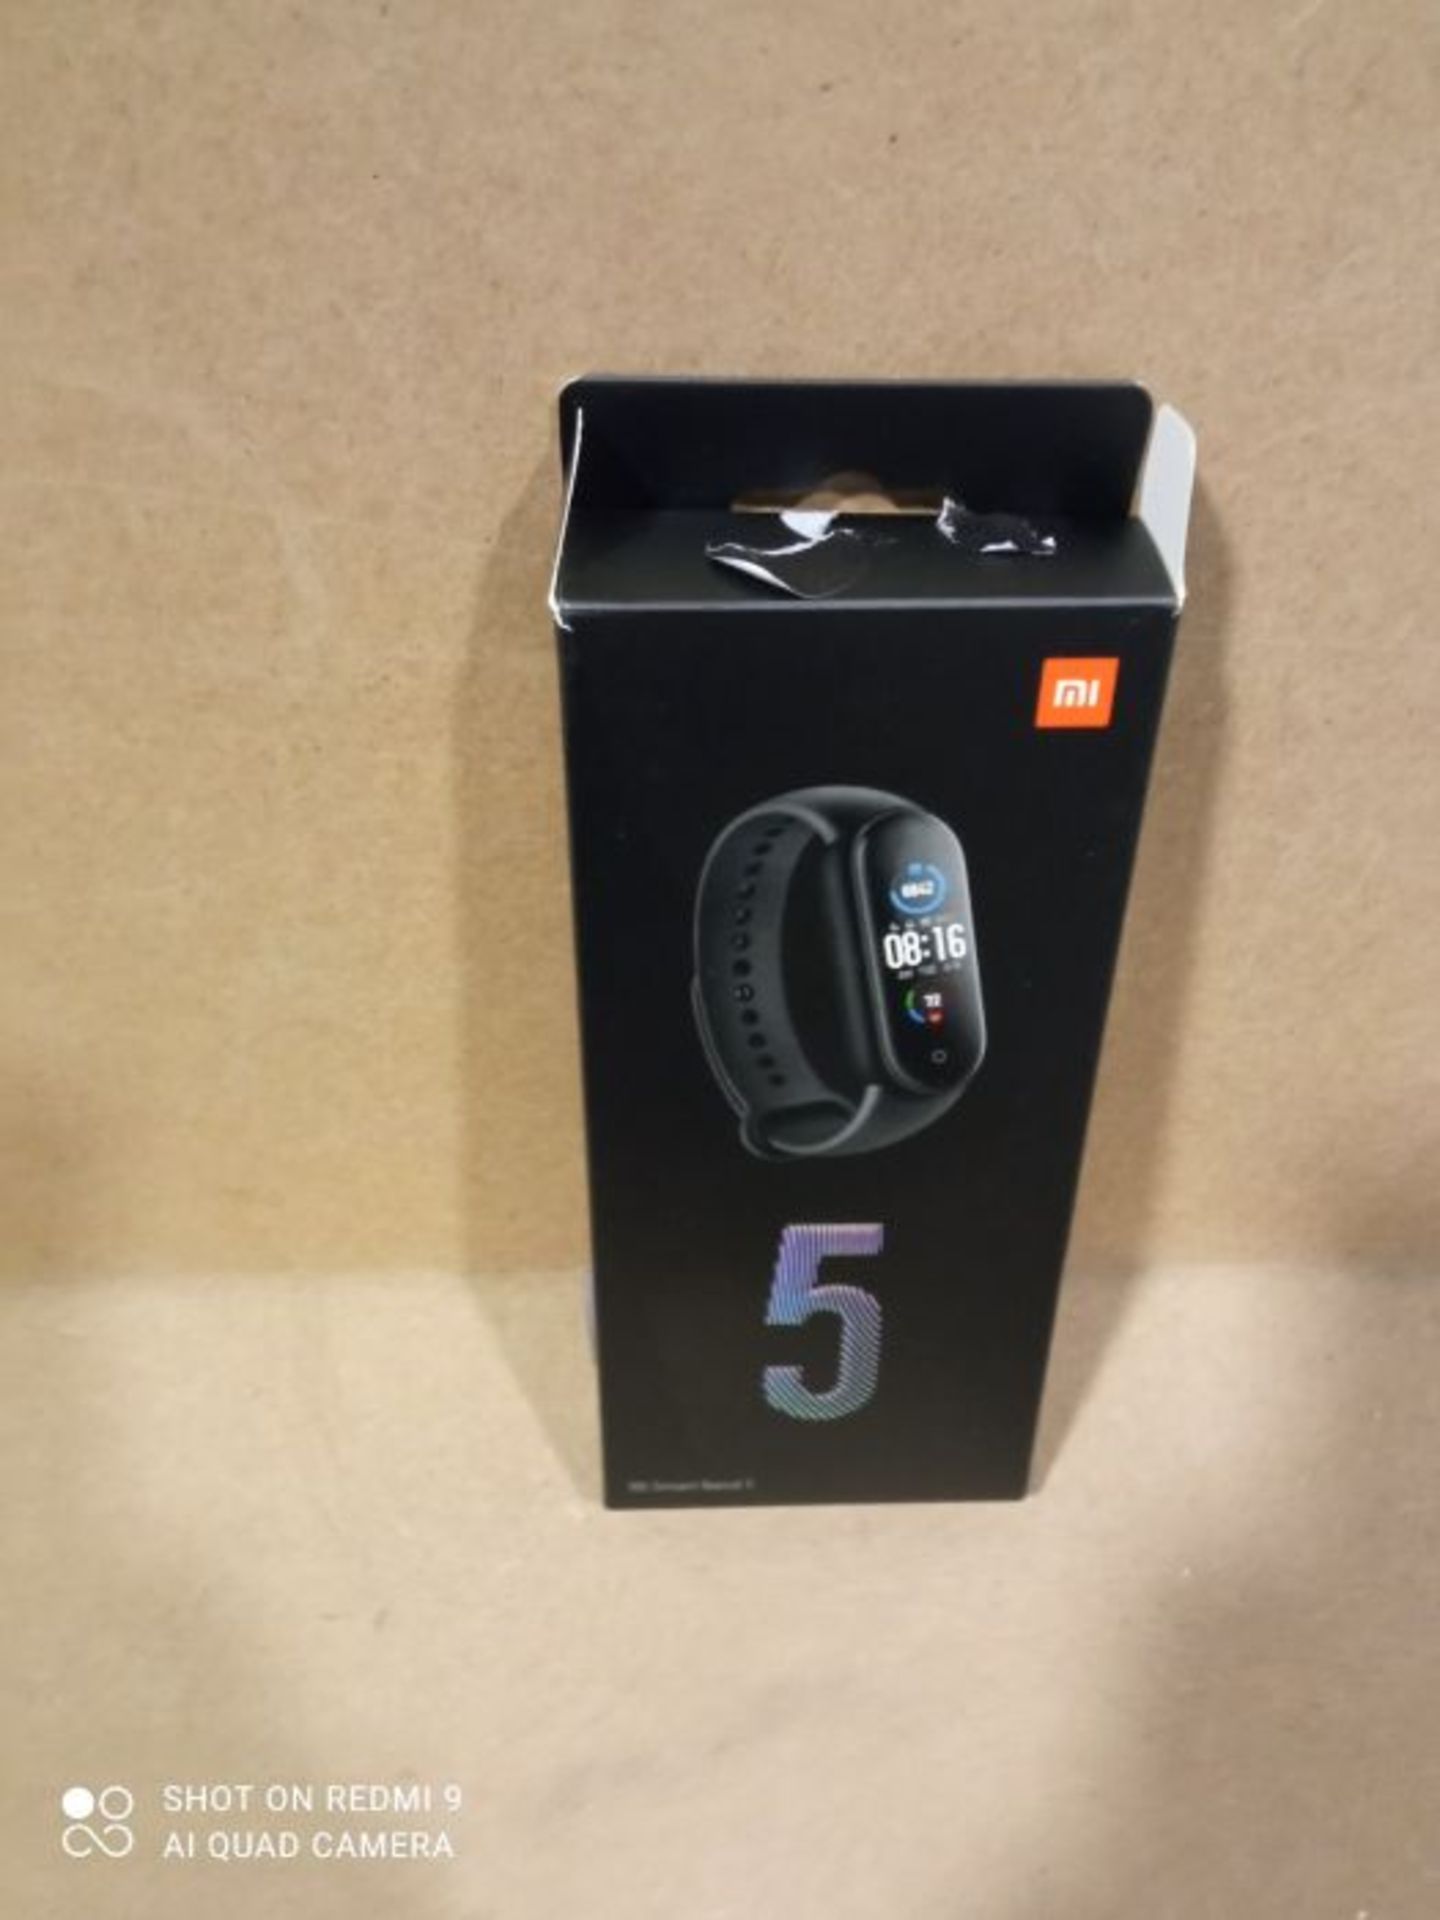 Xiaomi Mi Band 5 Black Health and Fitness Tracker, Upto 14 Days Battery, Heart Rate Mo - Image 2 of 3